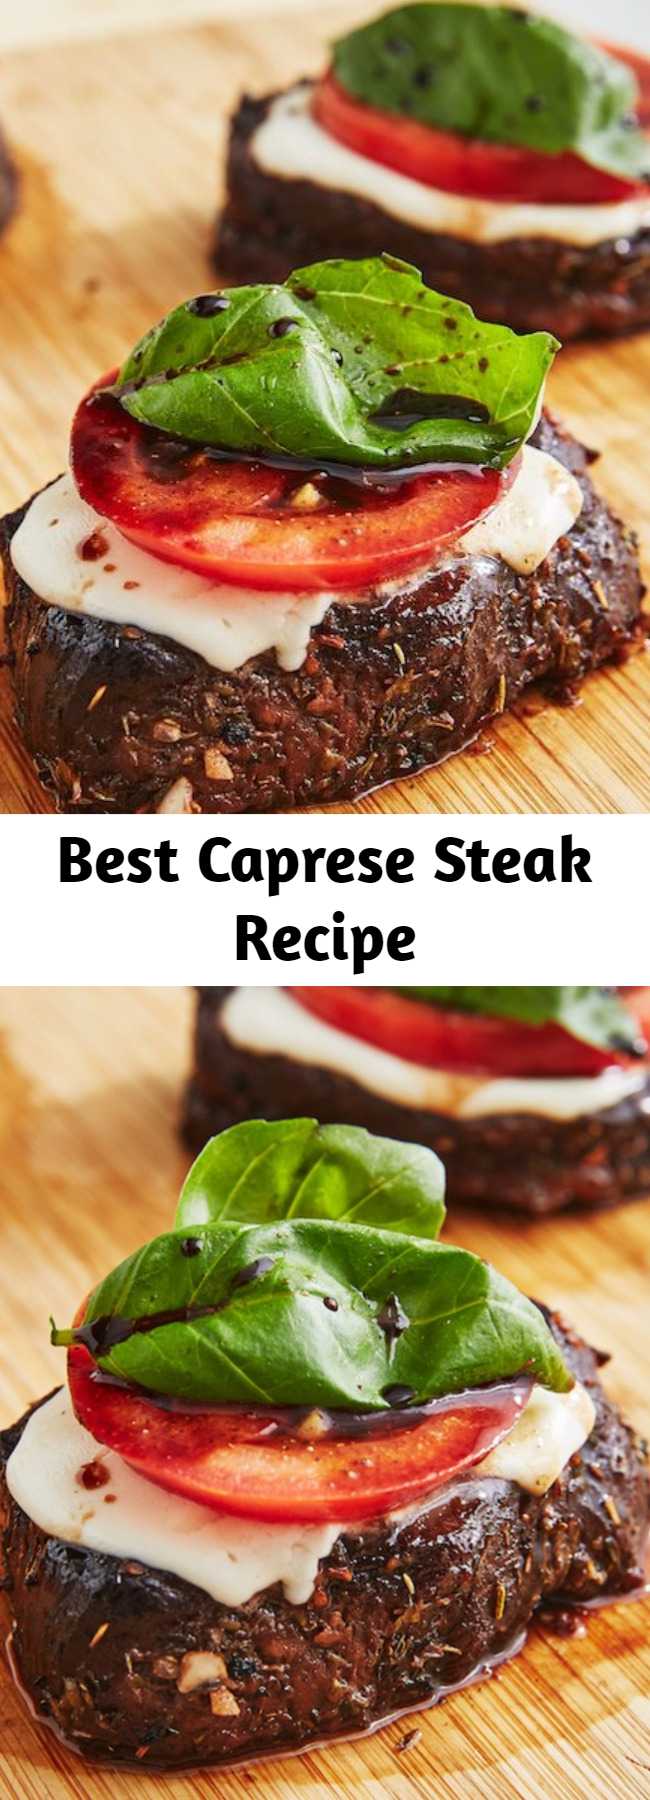 Best Caprese Steak Recipe - Looking for a caprese recipe? This Caprese Steak is amazing. Is making us totally capr-azy!